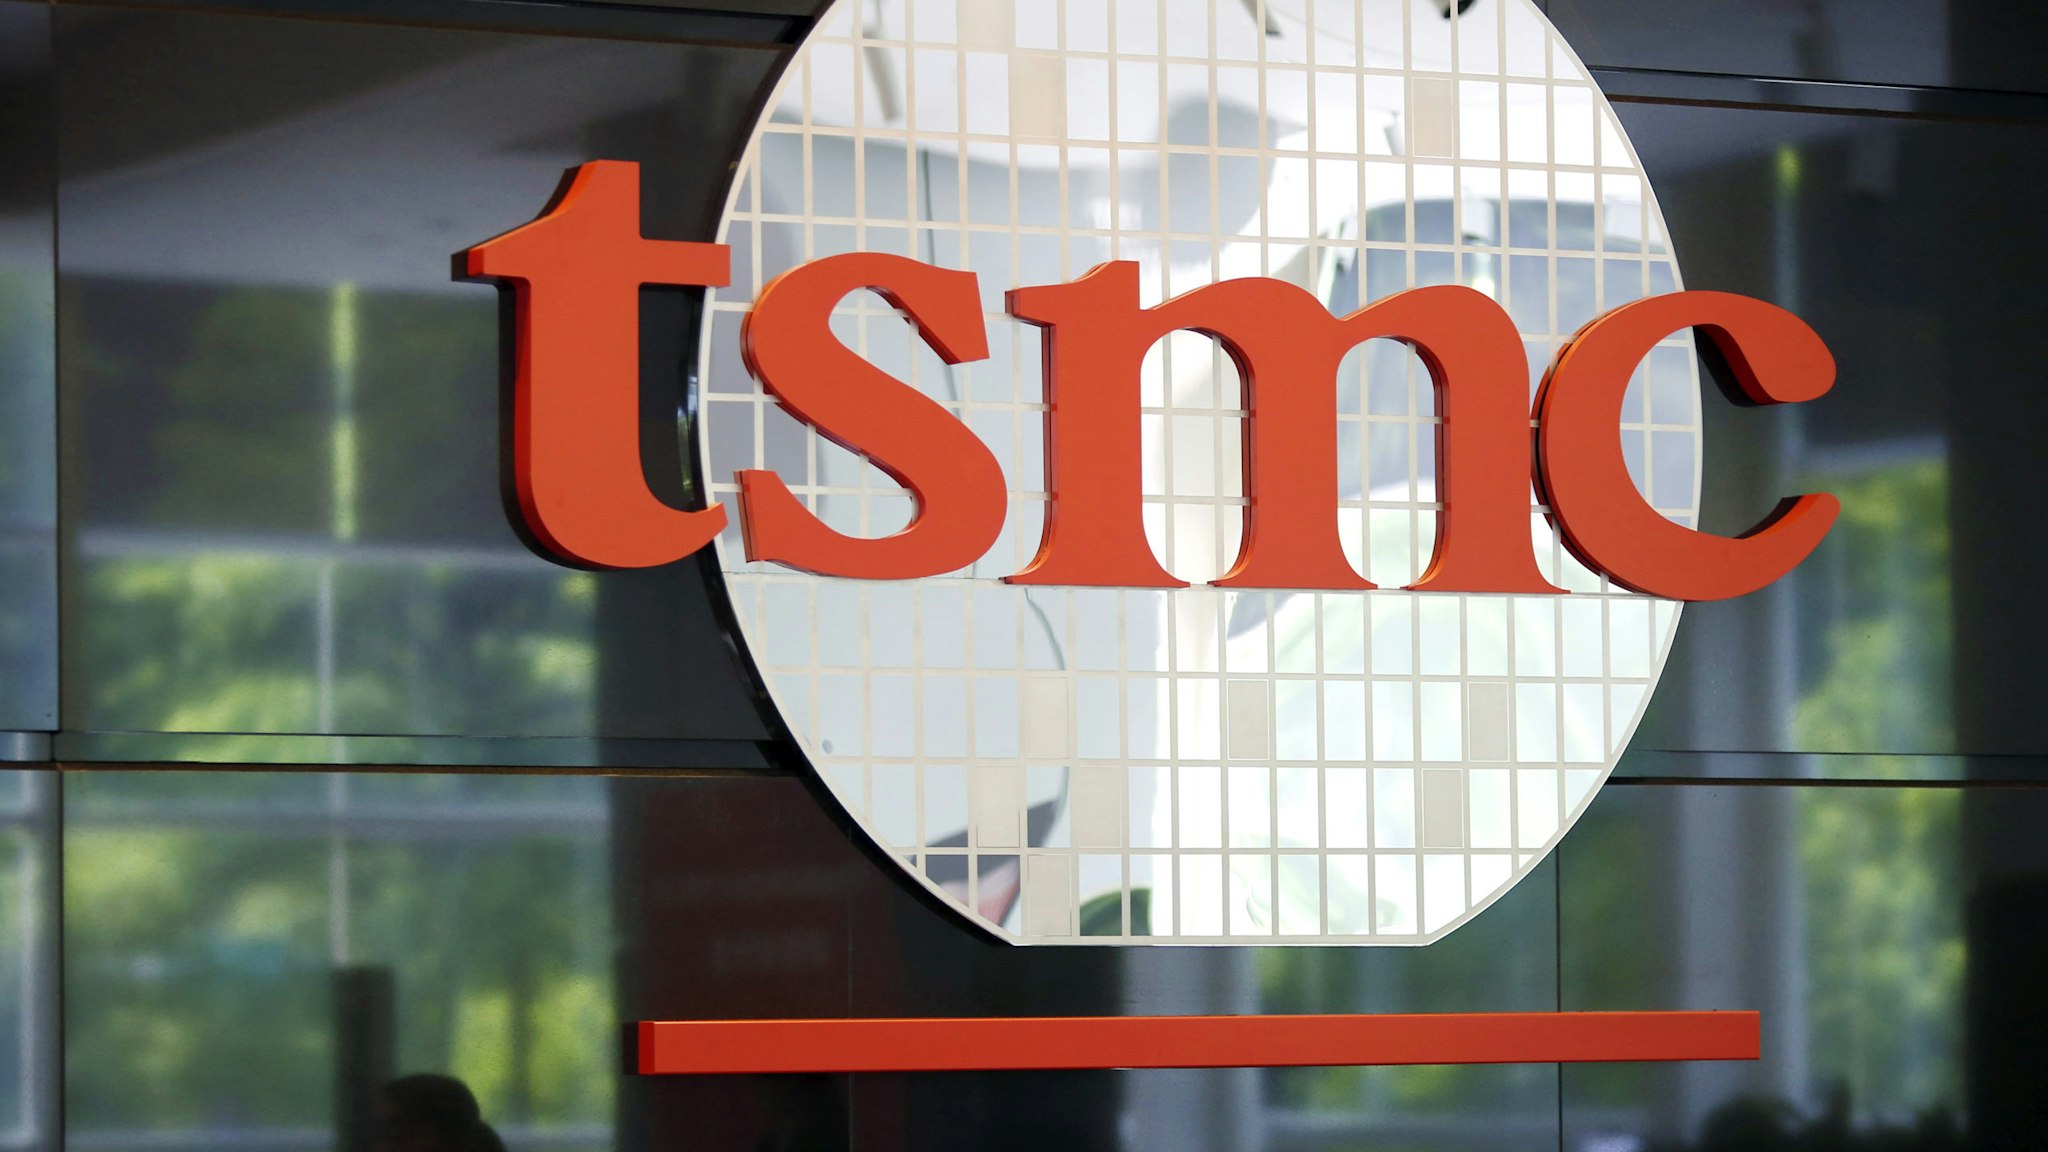 Signage for Taiwan Semiconductor Manufacturing Co. (TSMC) is displayed at the company's headquarters in Hsinchu, Taiwan, on Wednesday, June 5, 2019. TSMC Chairman Mark Liu didn't reaffirm a previous forecast that the company will grow slightly in 2019, saying uncertainty was too great at the moment.